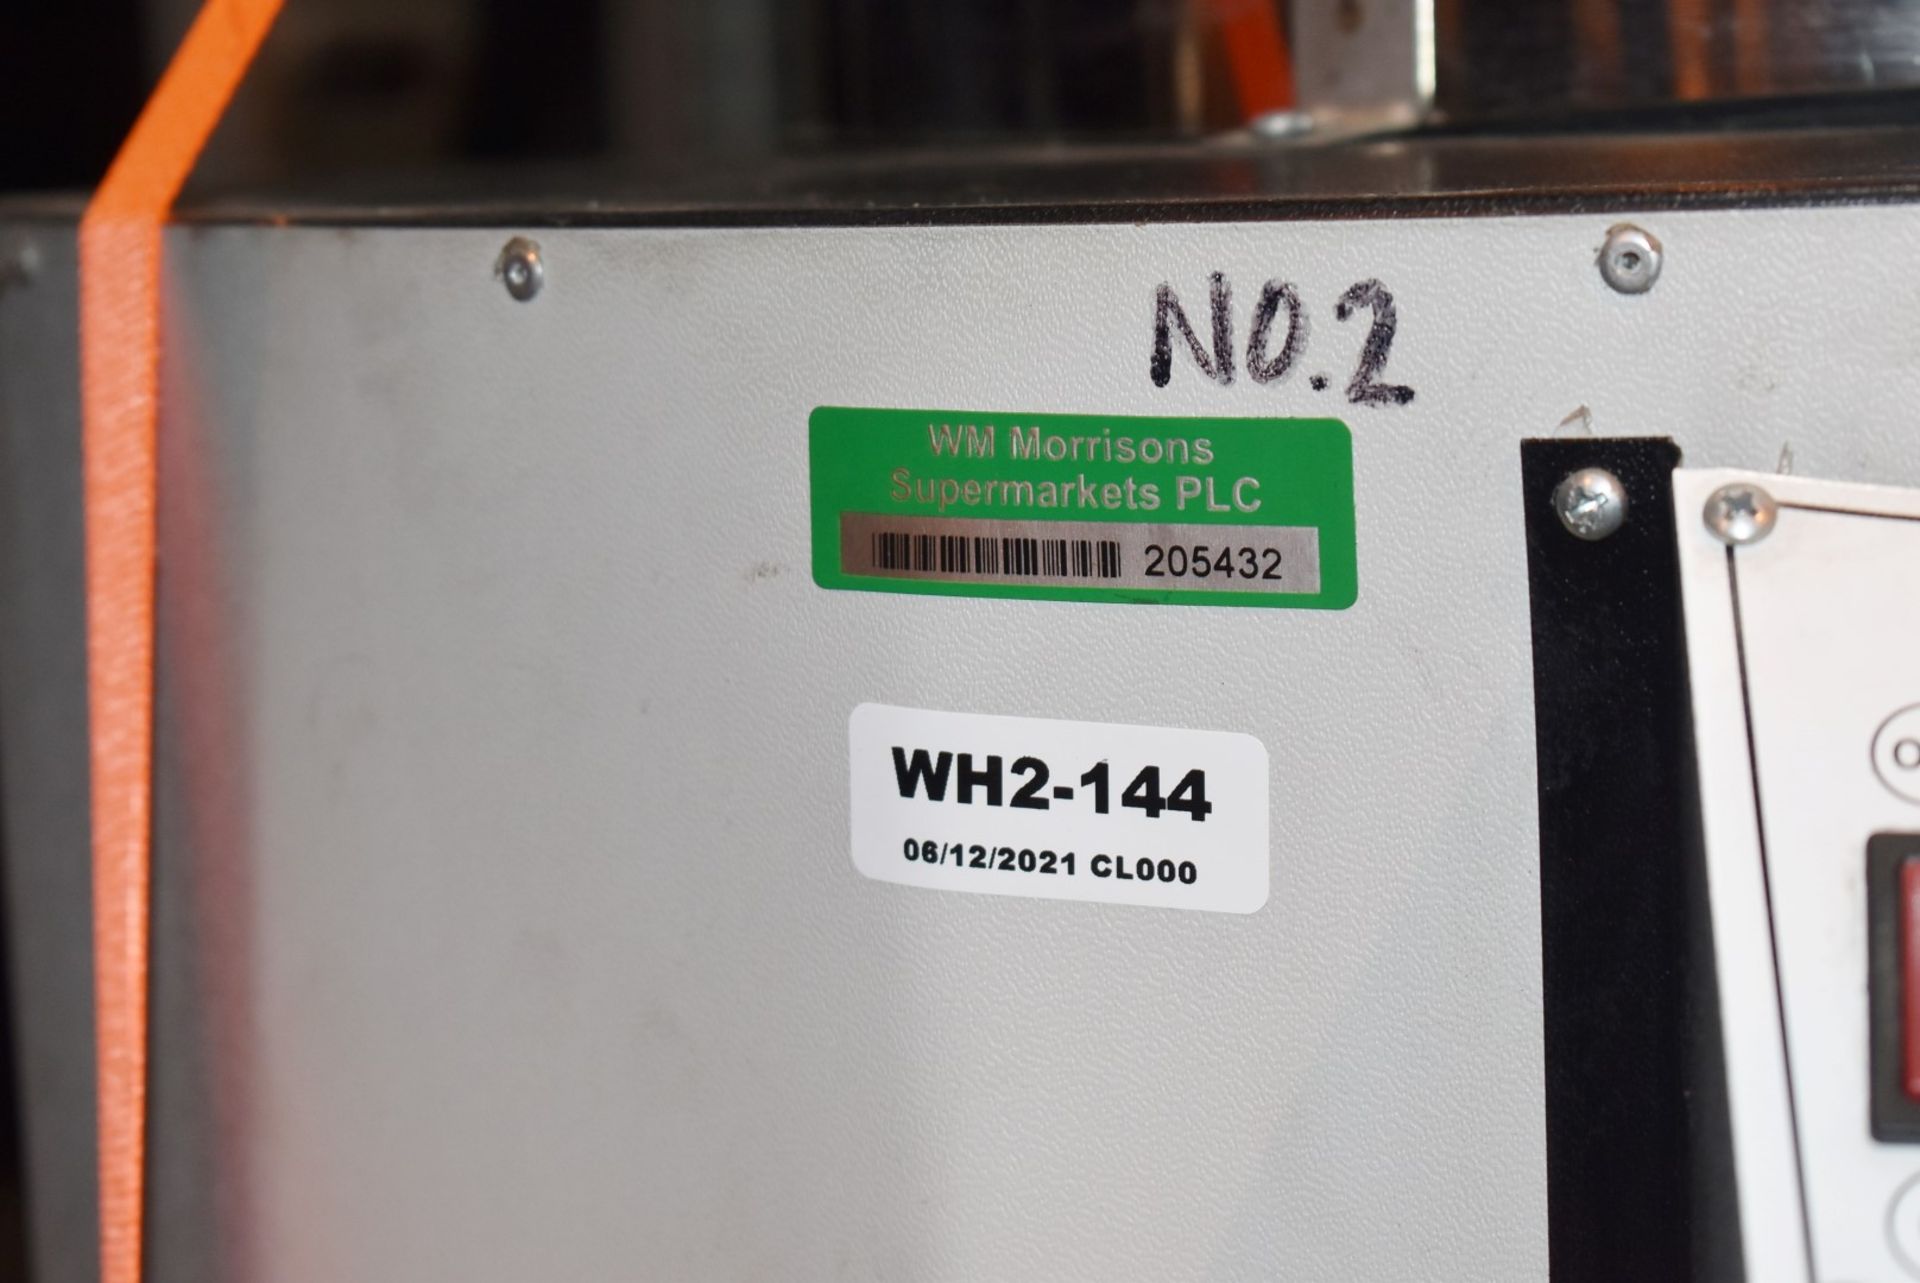 1 x Lochinvar High Efficiency Gas Fired 220L Storage Water Heater - Model LBF-220 - Ref: WH2-144 H5D - Image 17 of 19